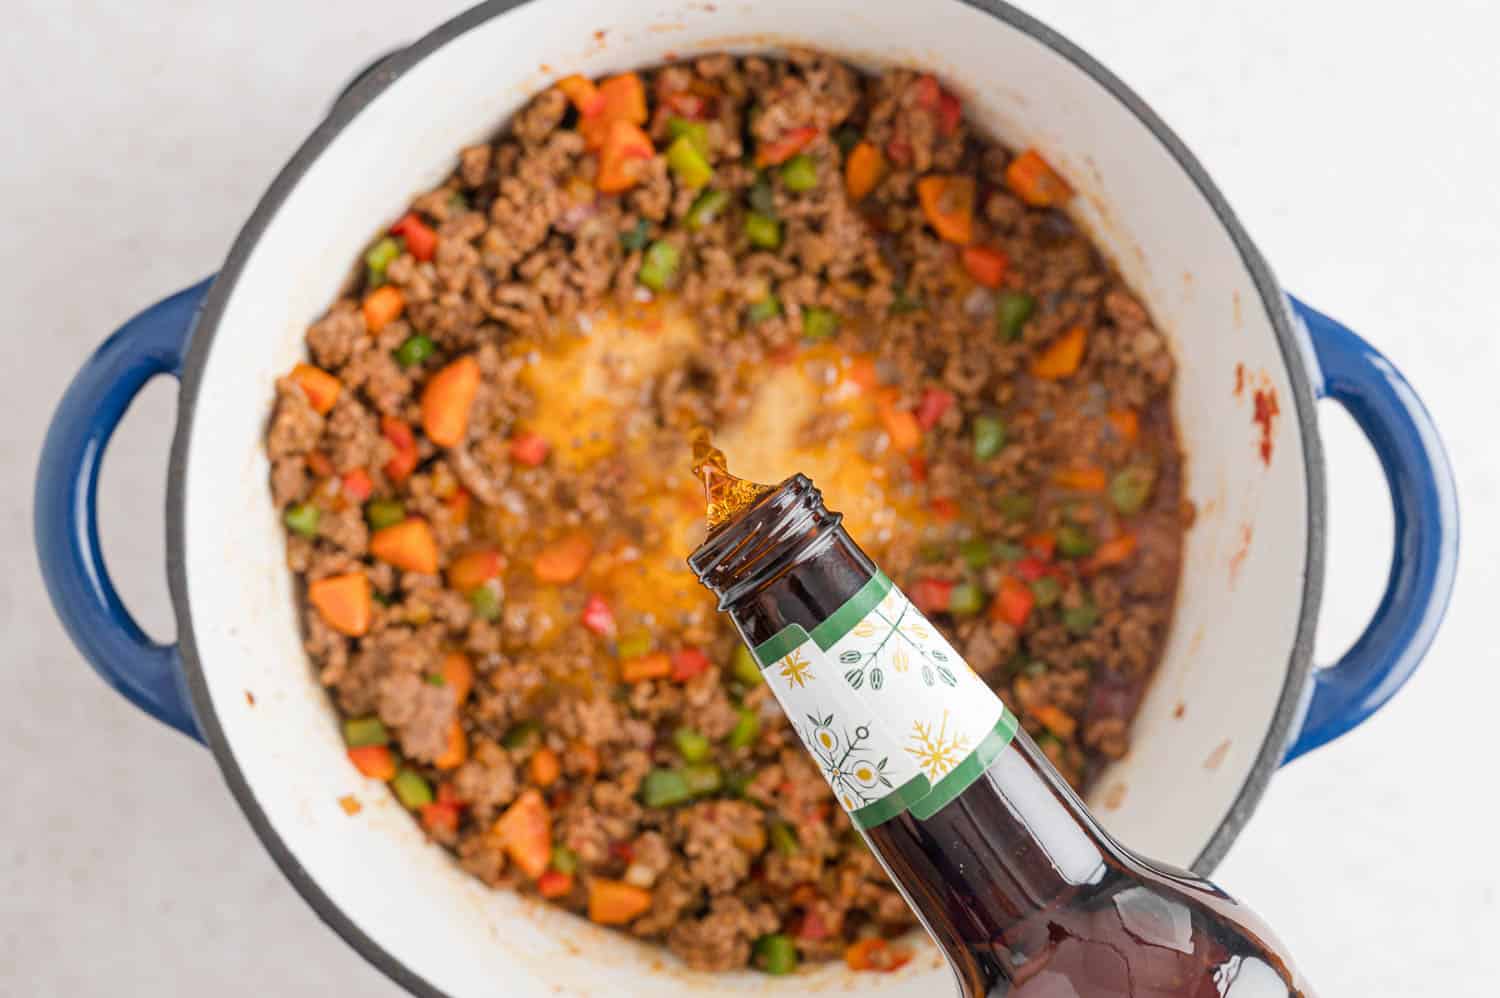 Beer being added to pan.